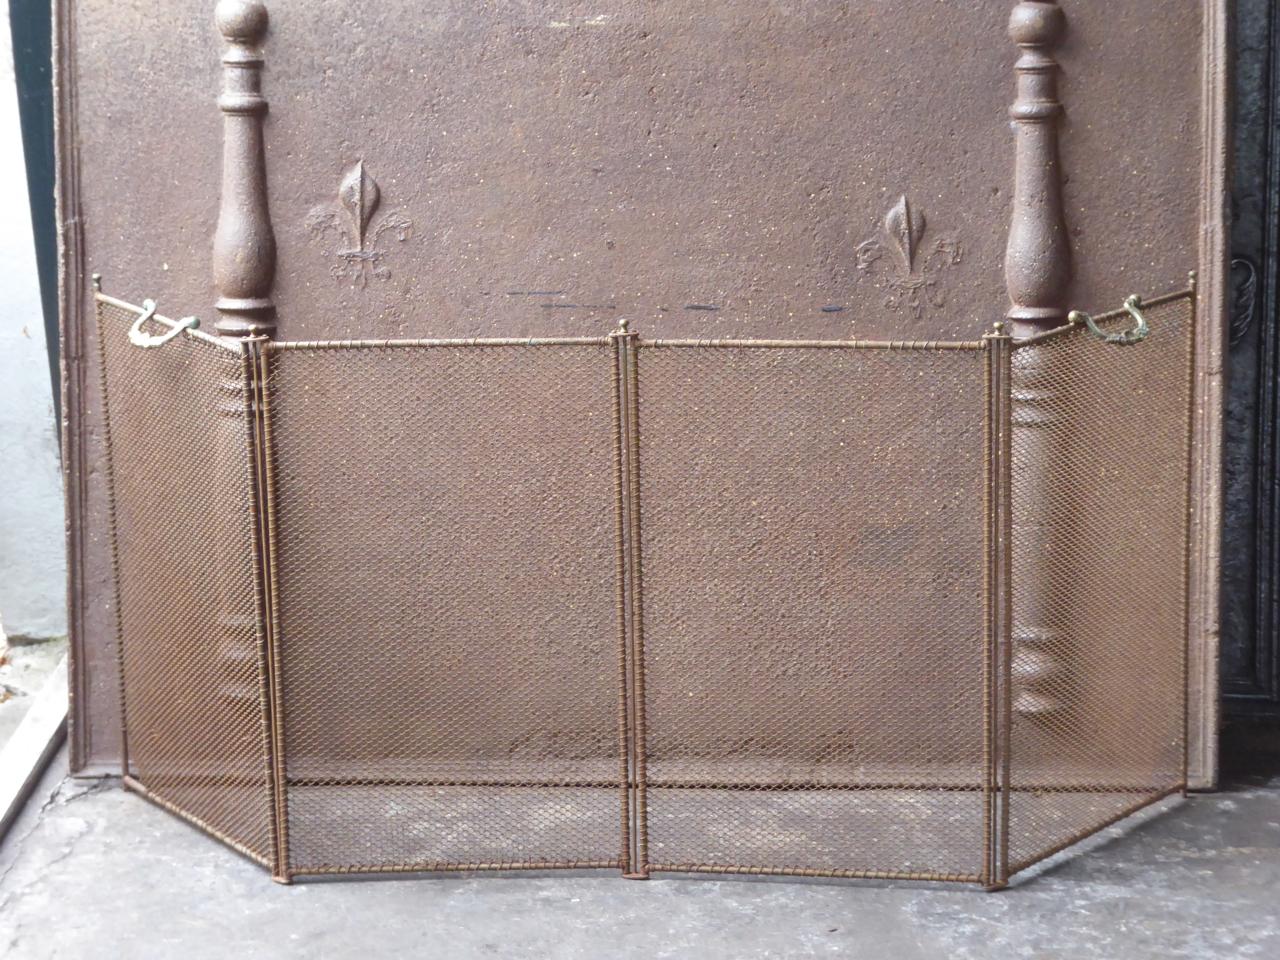 19th century French Napoleon III fireplace screen. The screen is made of iron and iron mesh.

We have a unique and specialized collection of antique and used fireplace accessories consisting of more than 1000 listings at 1stdibs. Amongst others,